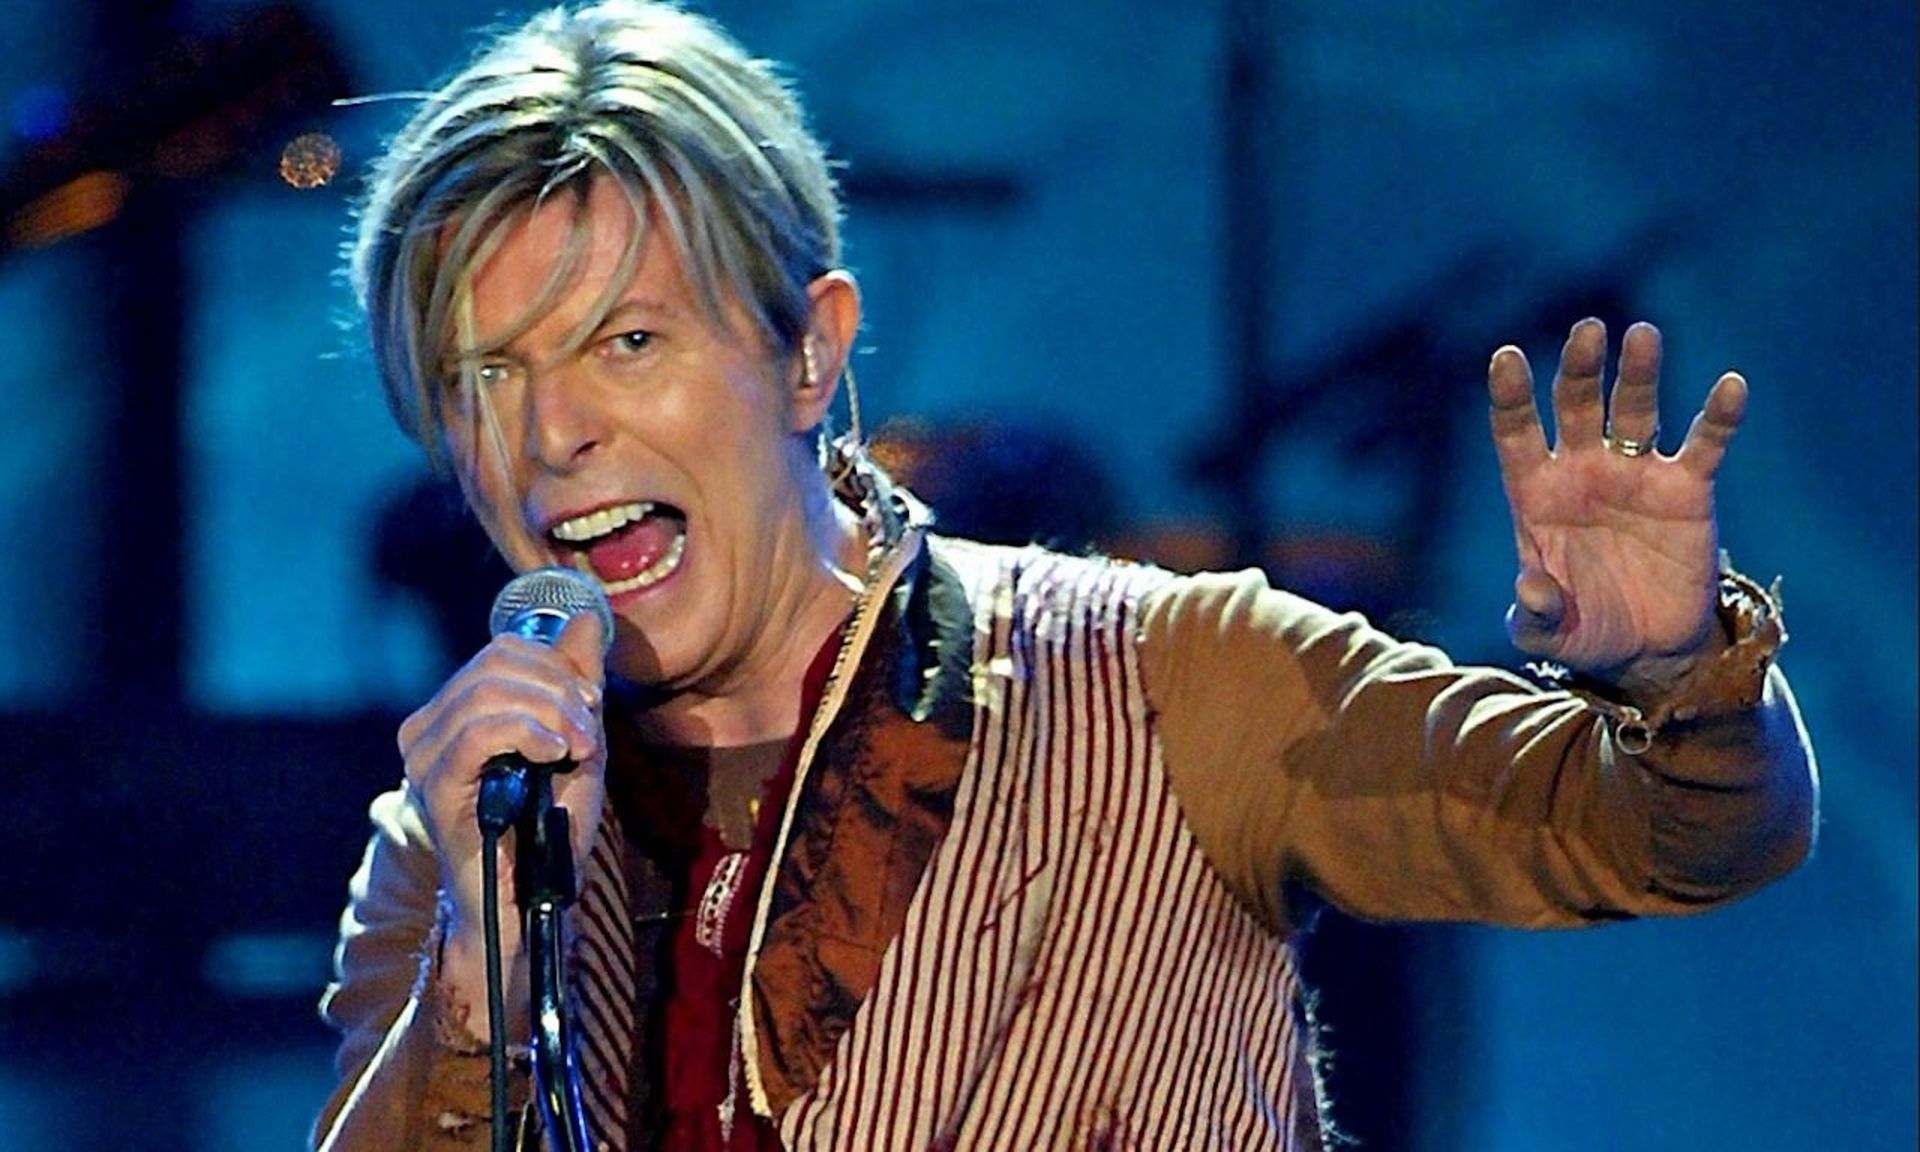 Today’s columnist, Mark Kerrison of New Net Technologies, invokes David Bowie to get the point across that the vast majority of security issues are tied to changes.